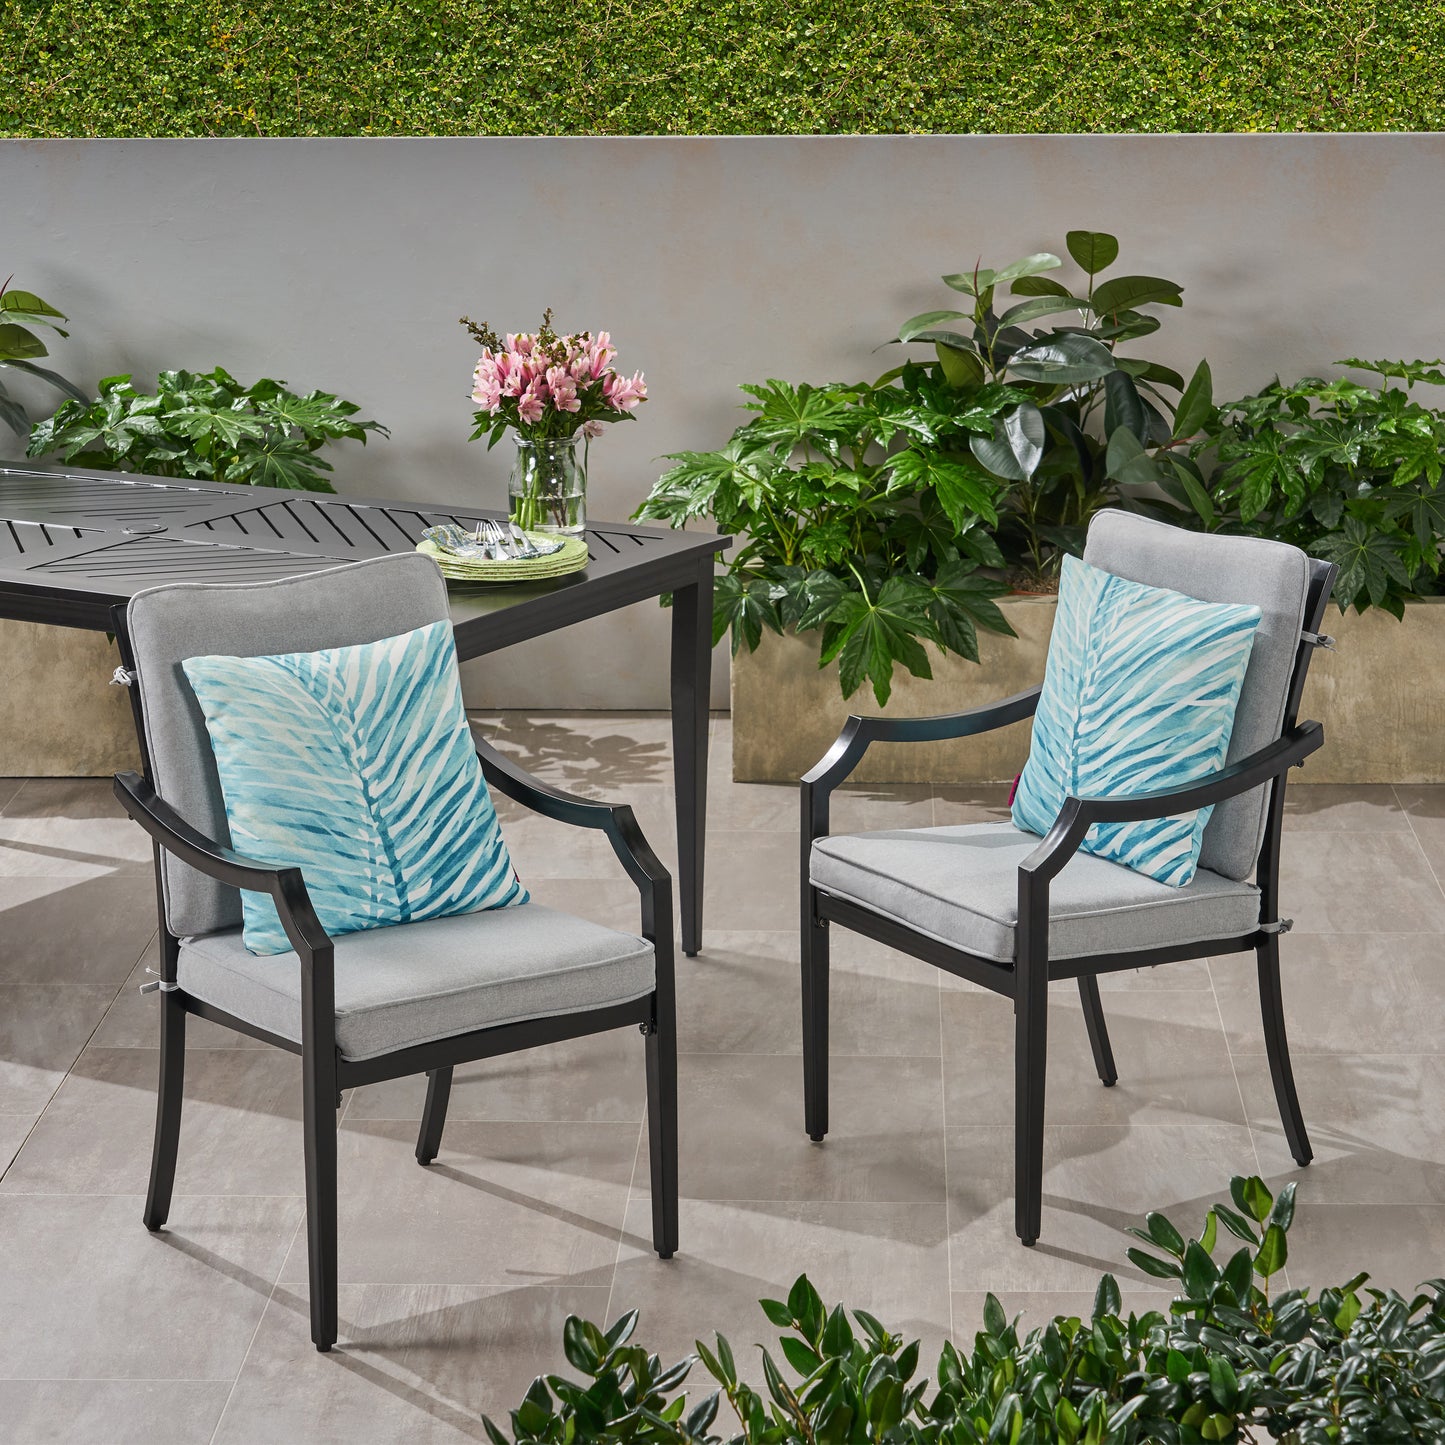 Carlson Diego Outdoor Aluminum Dining Chairs with Cushions (Set of 2)